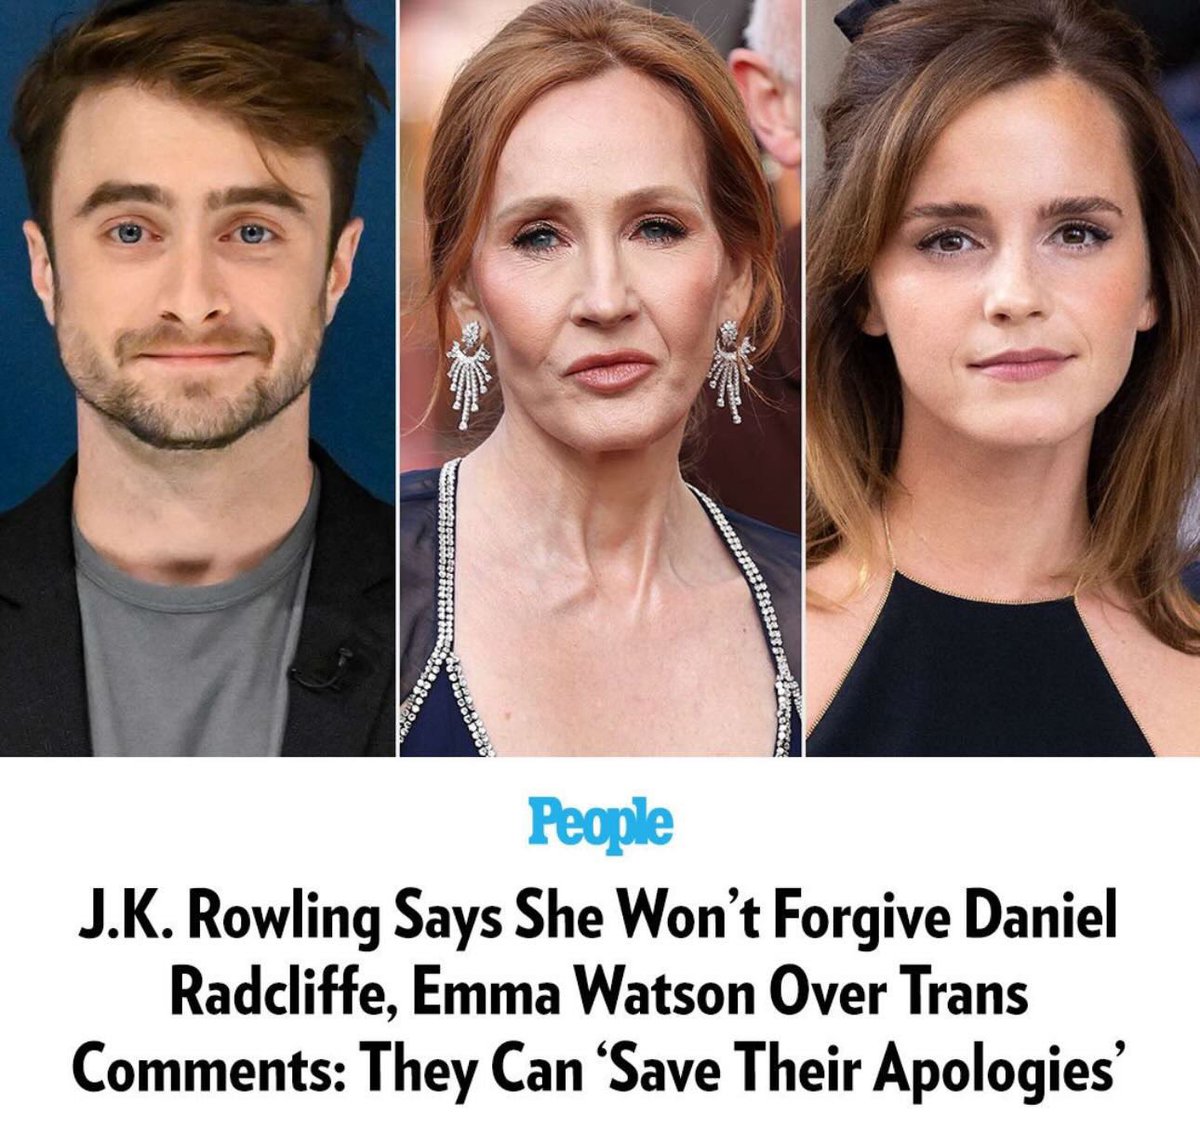 they’ve literally never apologized